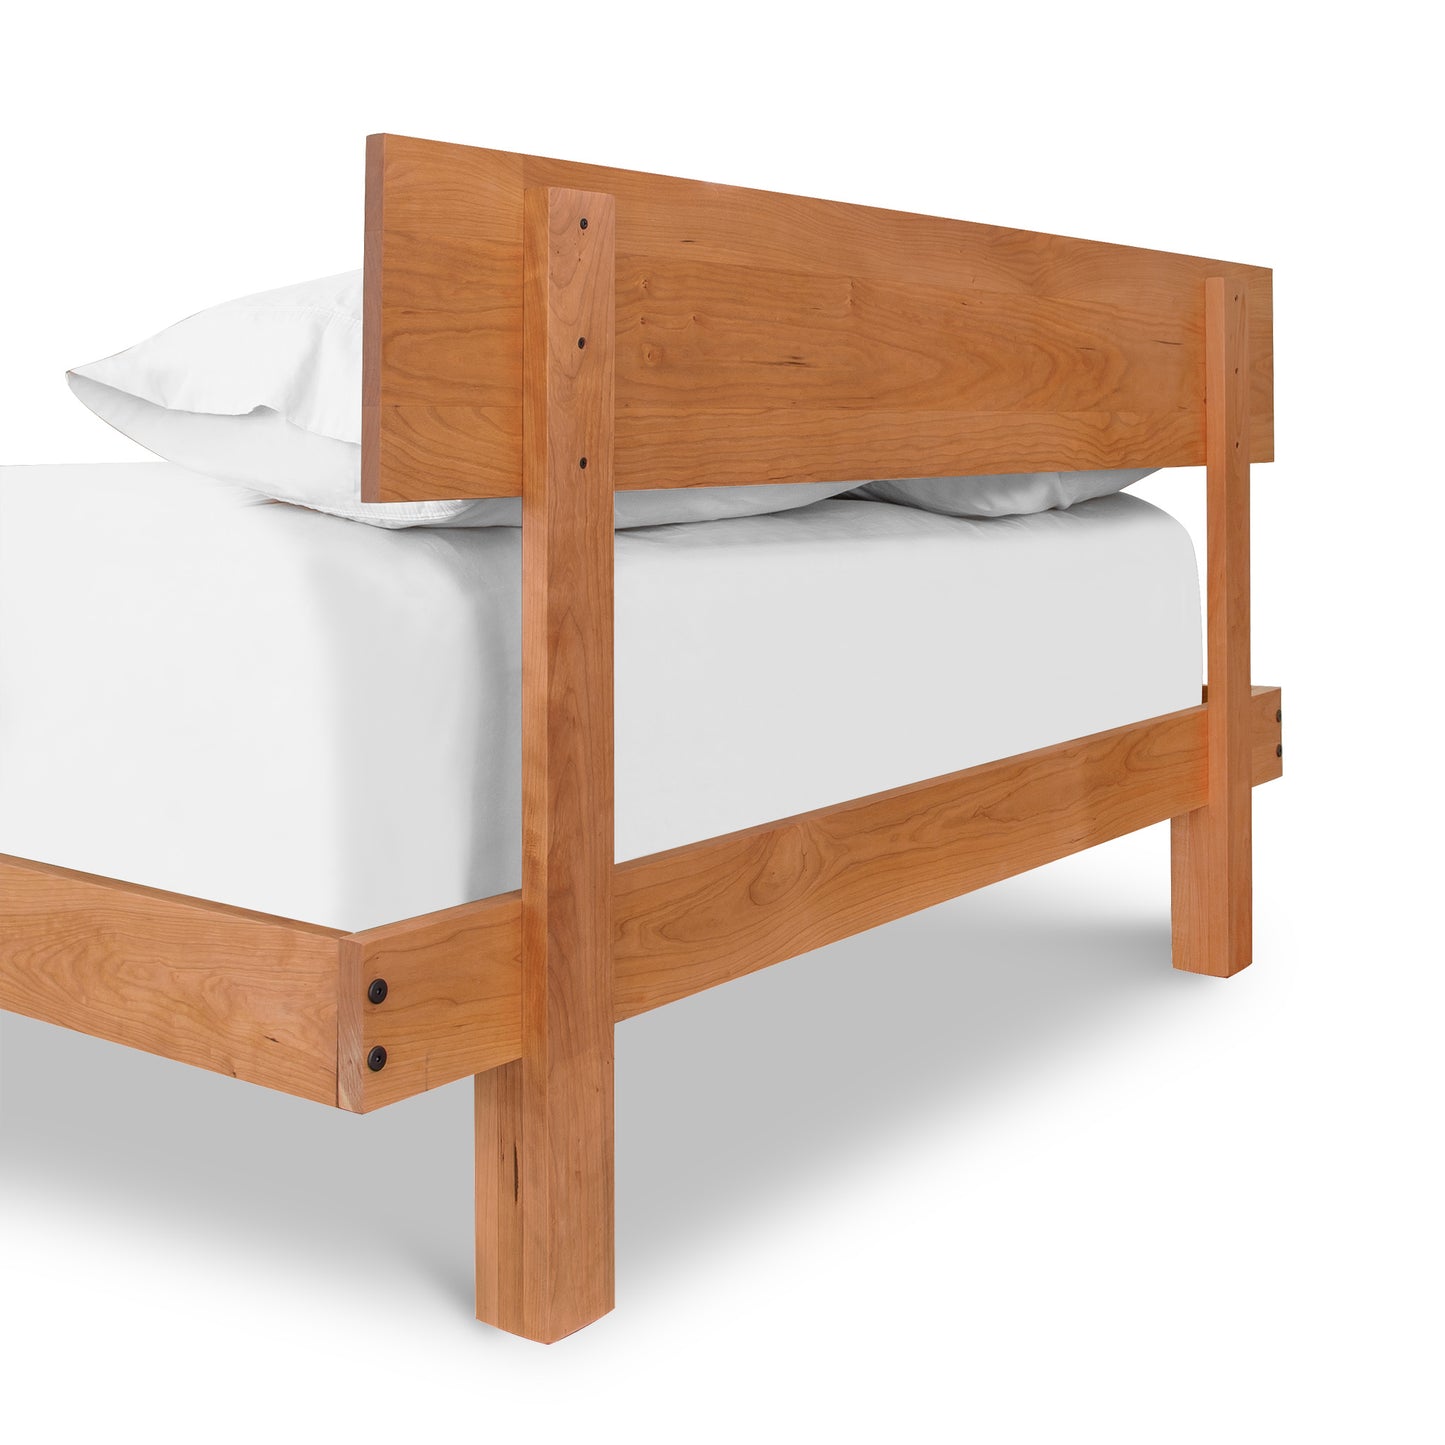 A solid wood Vermont Furniture Designs Kipling Bed frame with a white mattress and a single pillow against a white background.